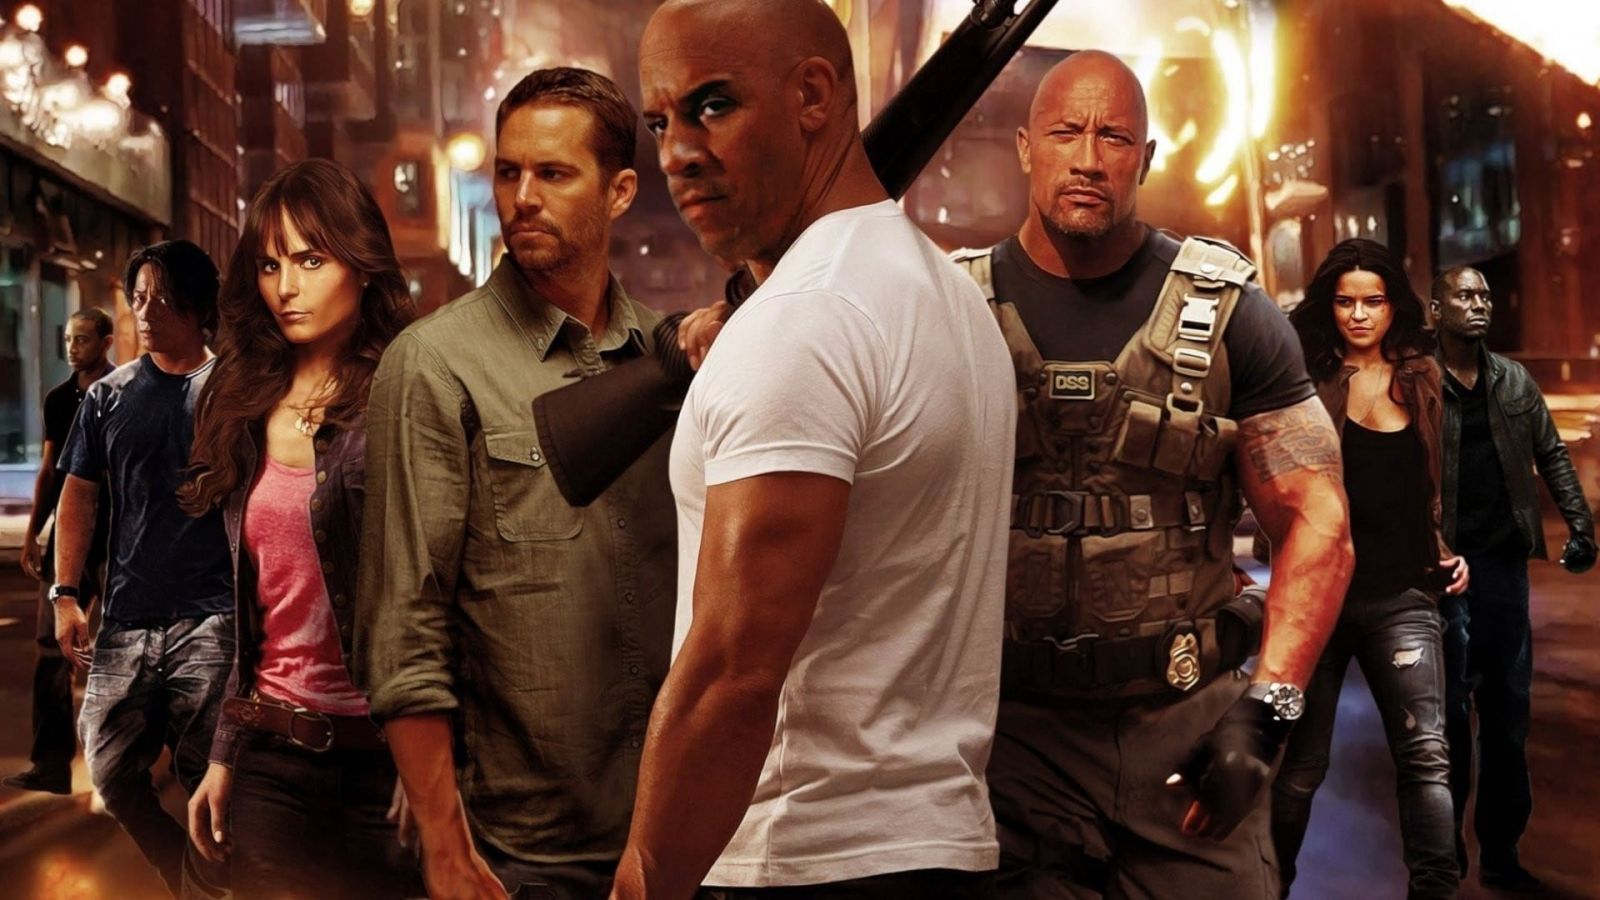 Fast and Furious 7 (2015) Full Movies Watch Online Free Download